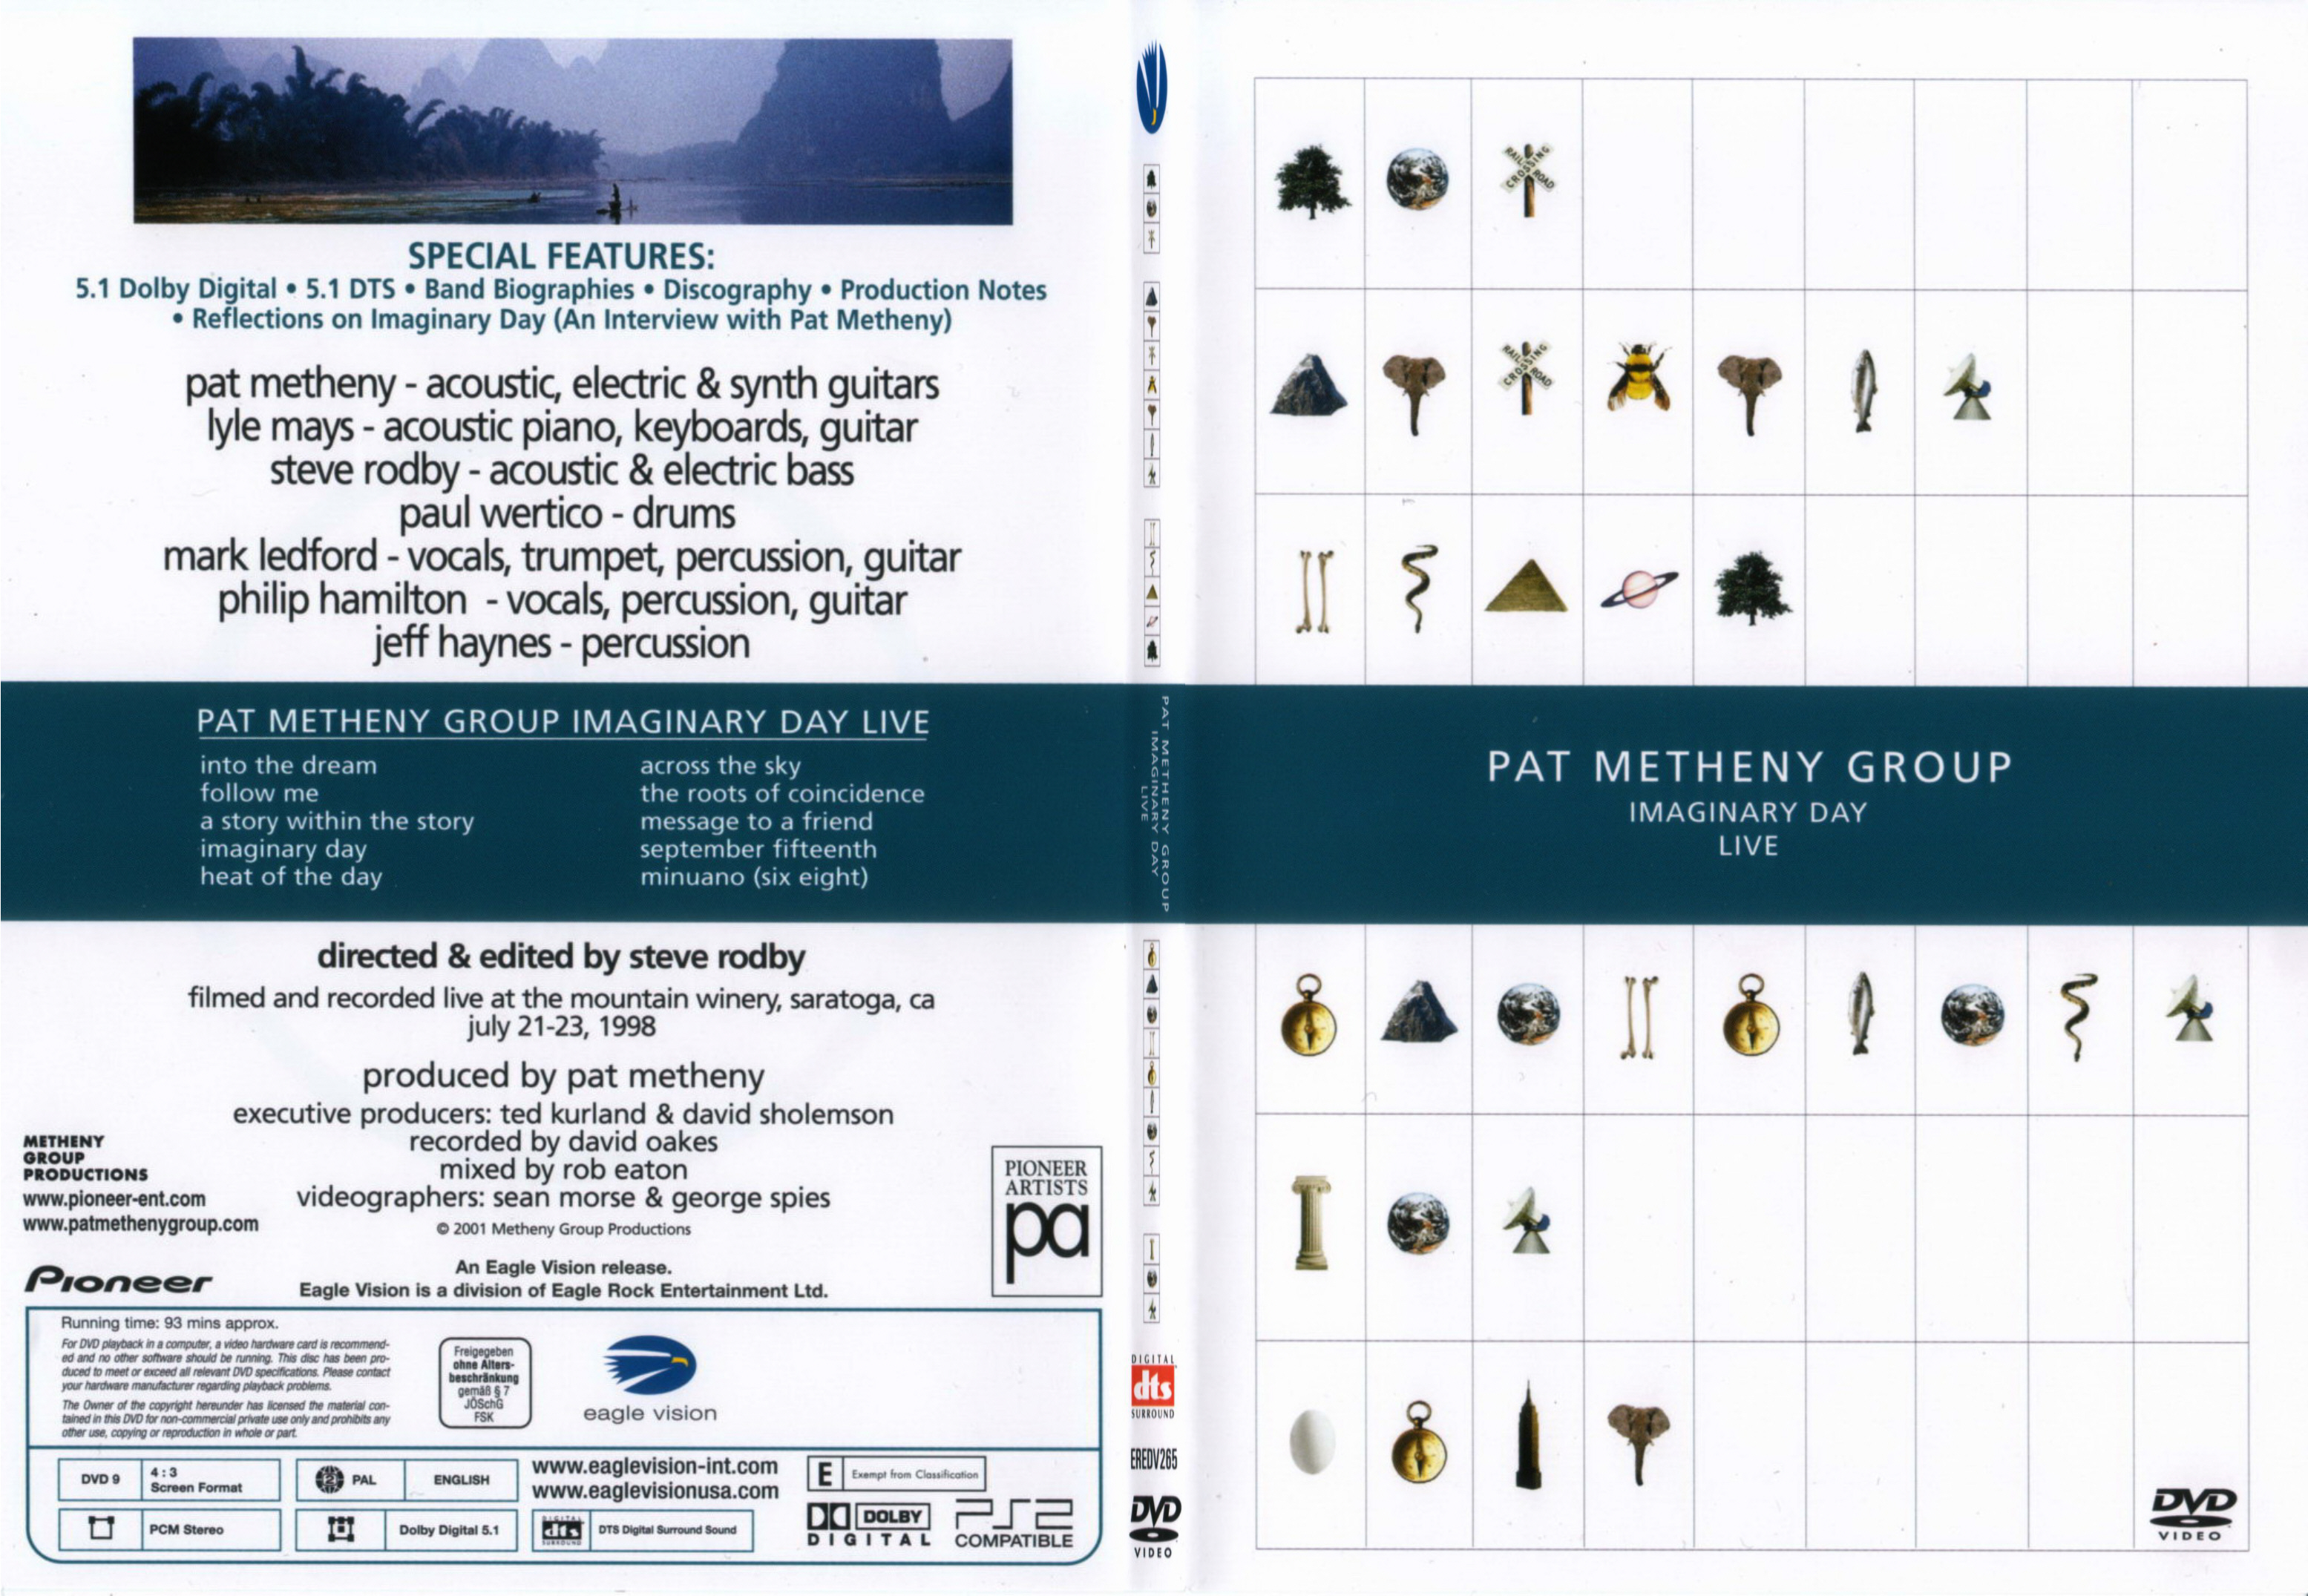 Jaquette DVD Pat Metheny Group - Imaginary day live - SLIM